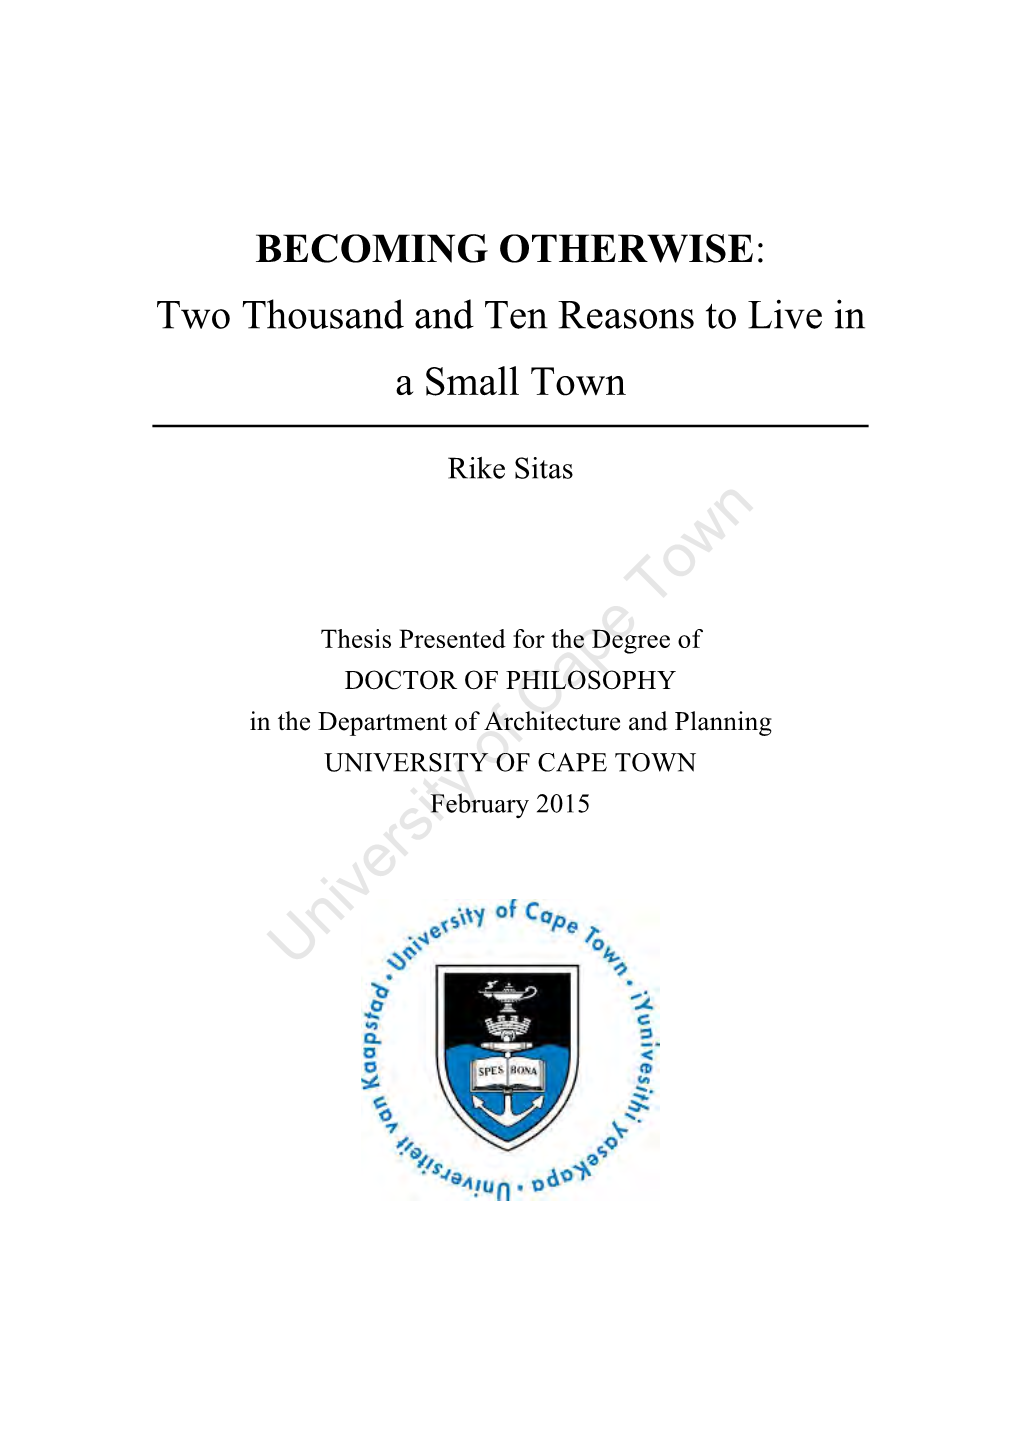 BECOMING OTHERWISE: Two Thousand and Ten Reasons to Live in a Small Town